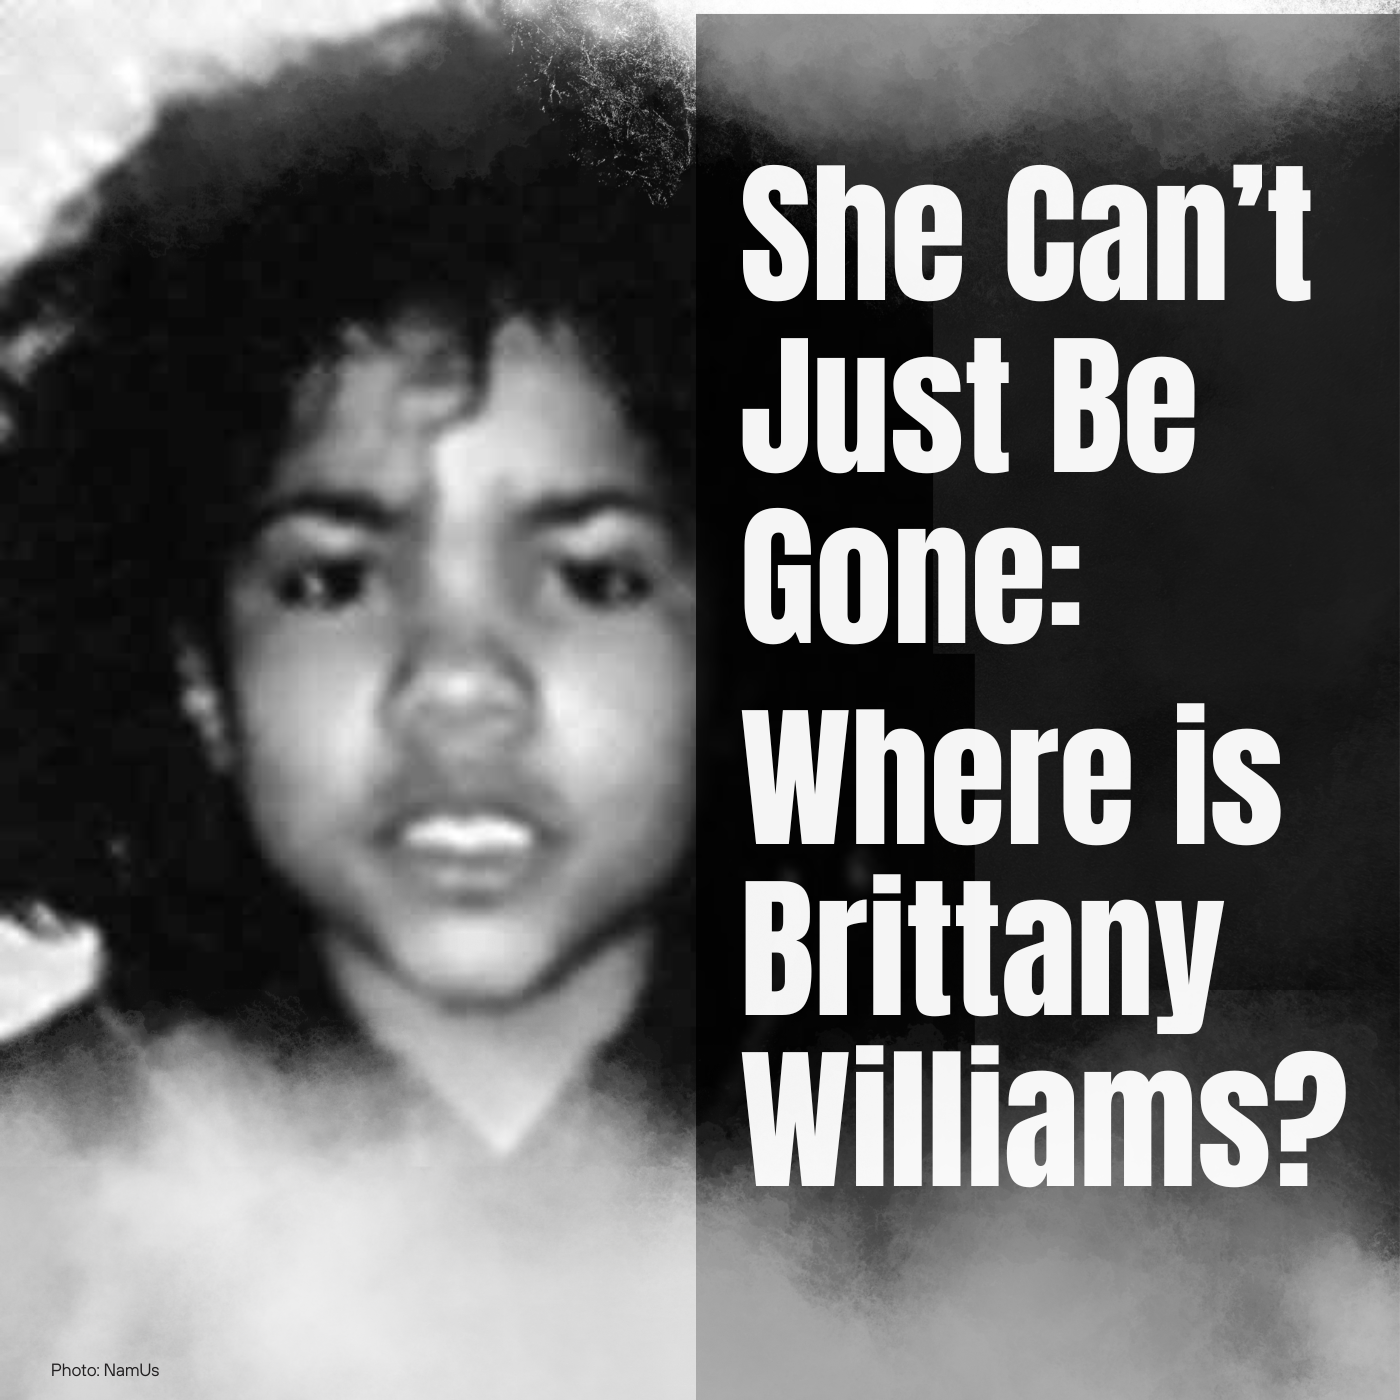 She Can’t Just Be Gone: Where is Brittany Williams?